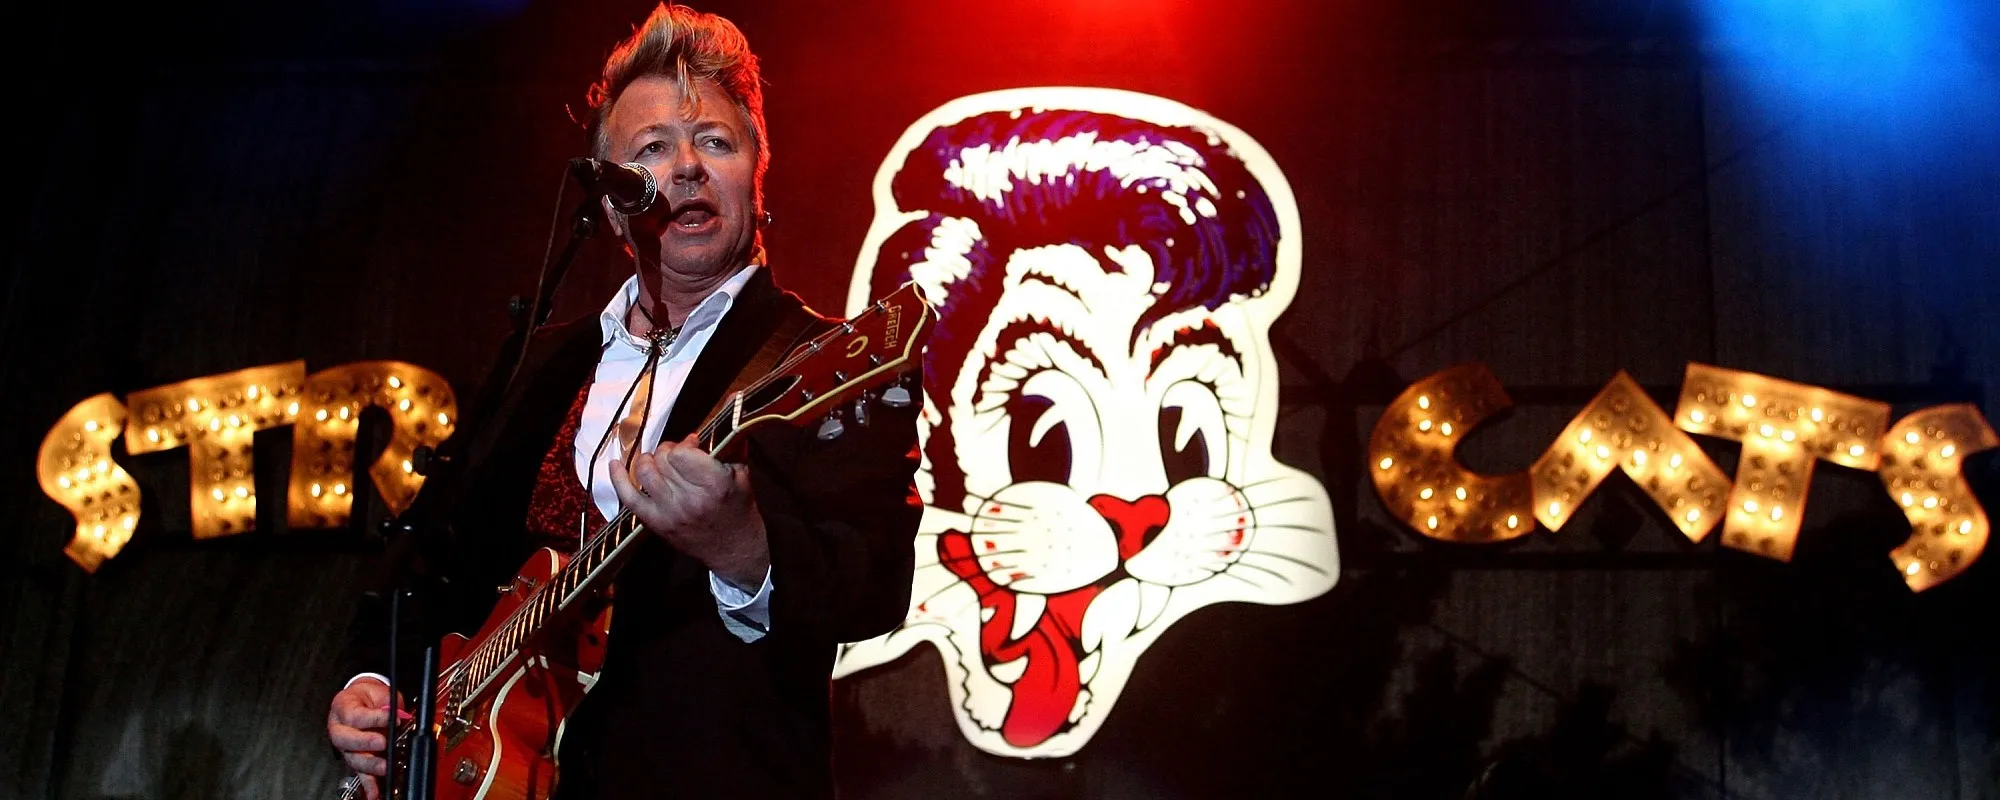 Did You Know These 5 Fascinating Facts About the Stray Cats’ Brian Setzer?